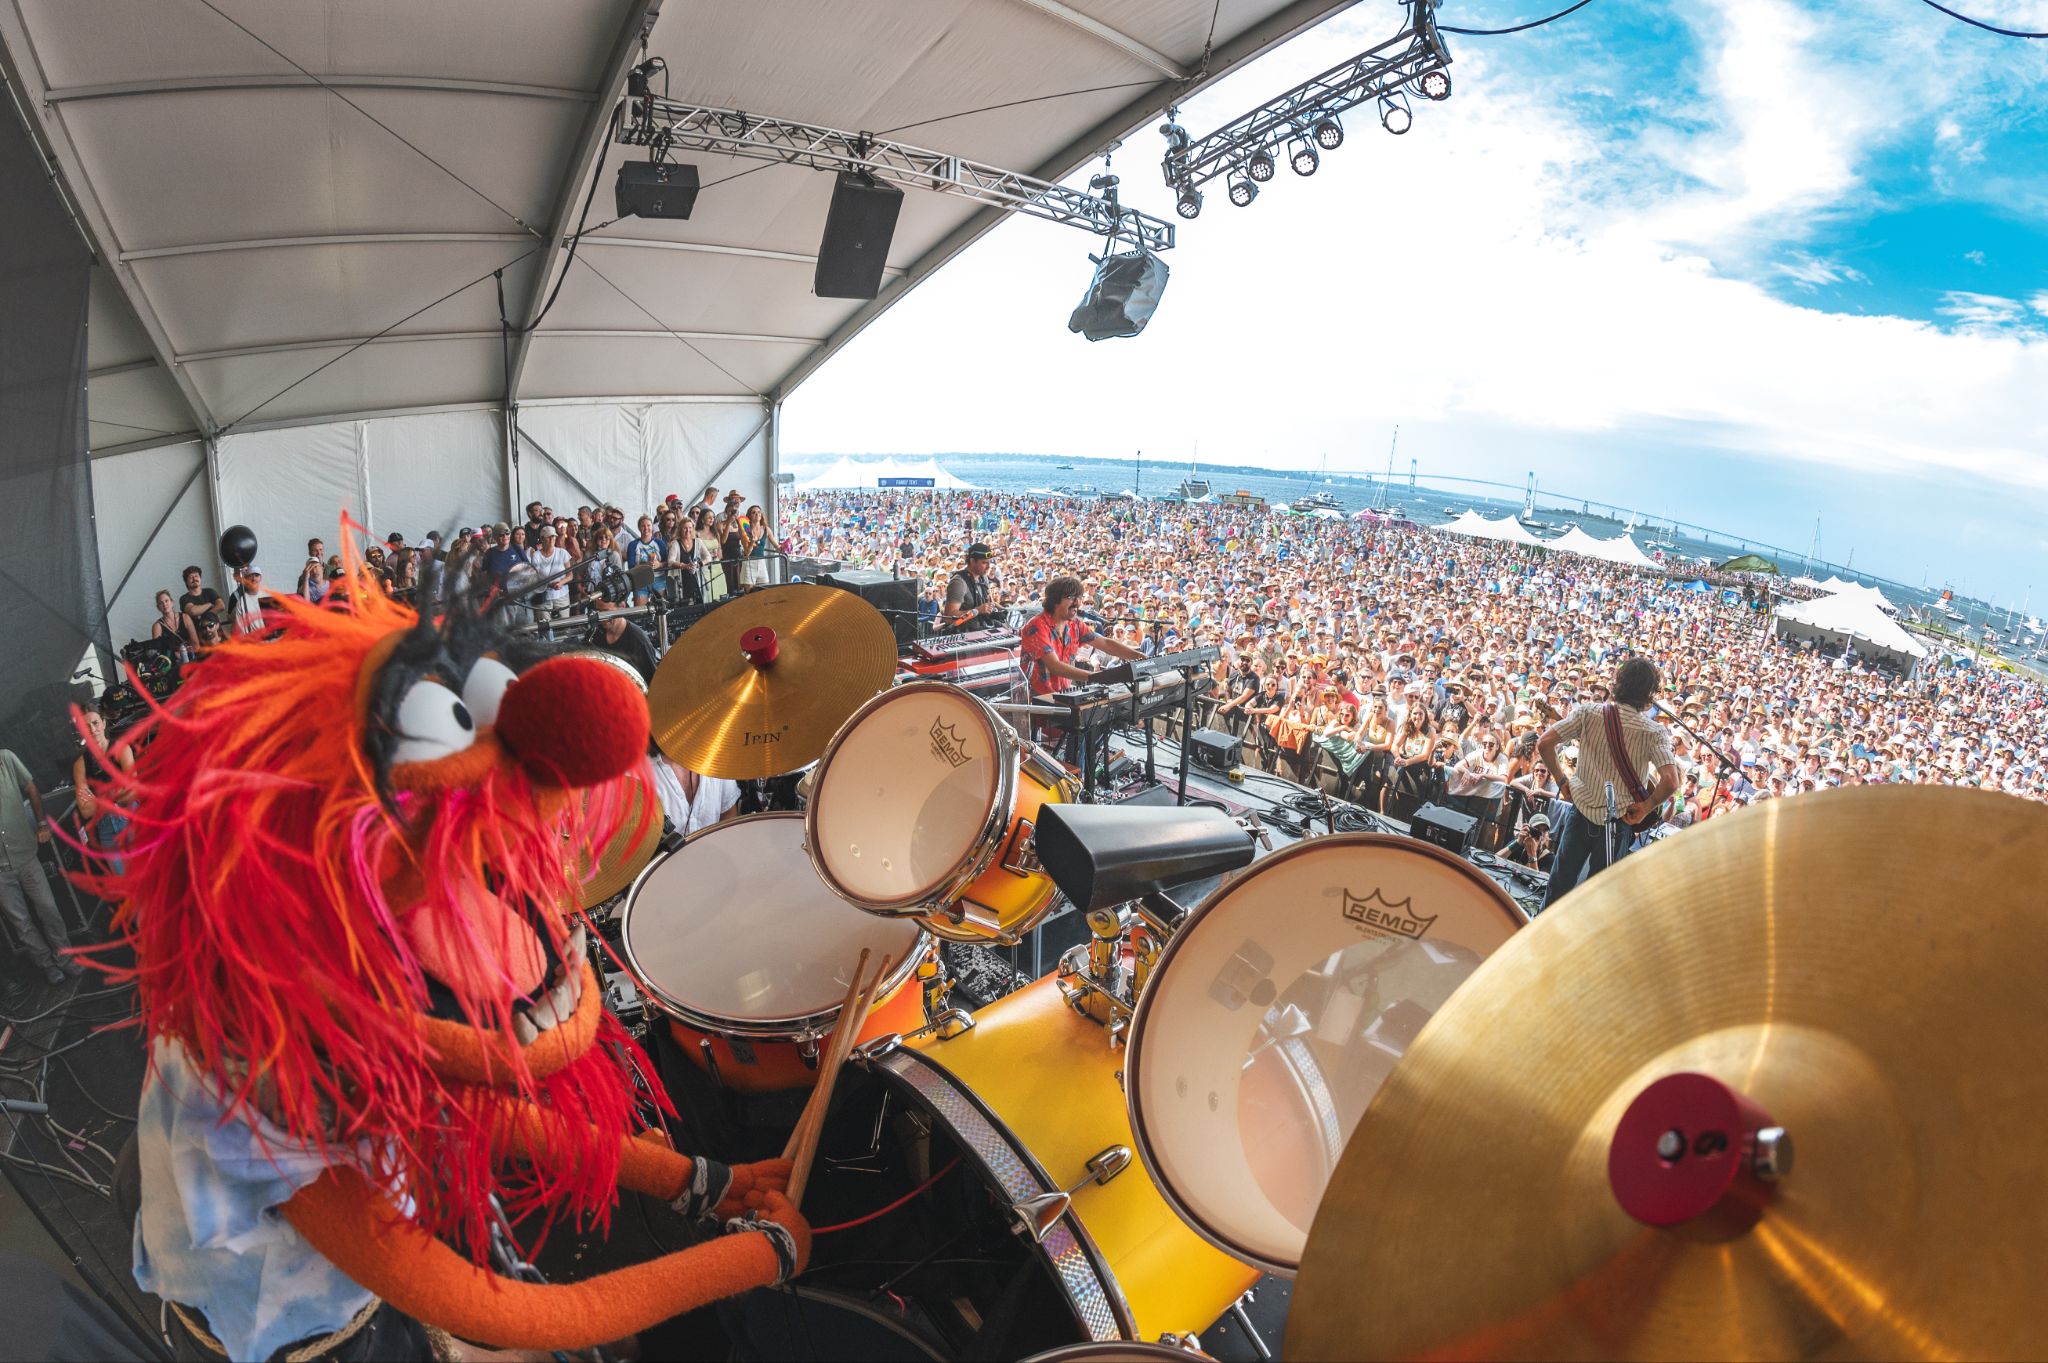 GOOSE WELCOMES THE MUPPETS’ ANIMAL FOR AN UNFORGETTABLE SIT-IN AT NEWPORT FOLK FESTIVAL